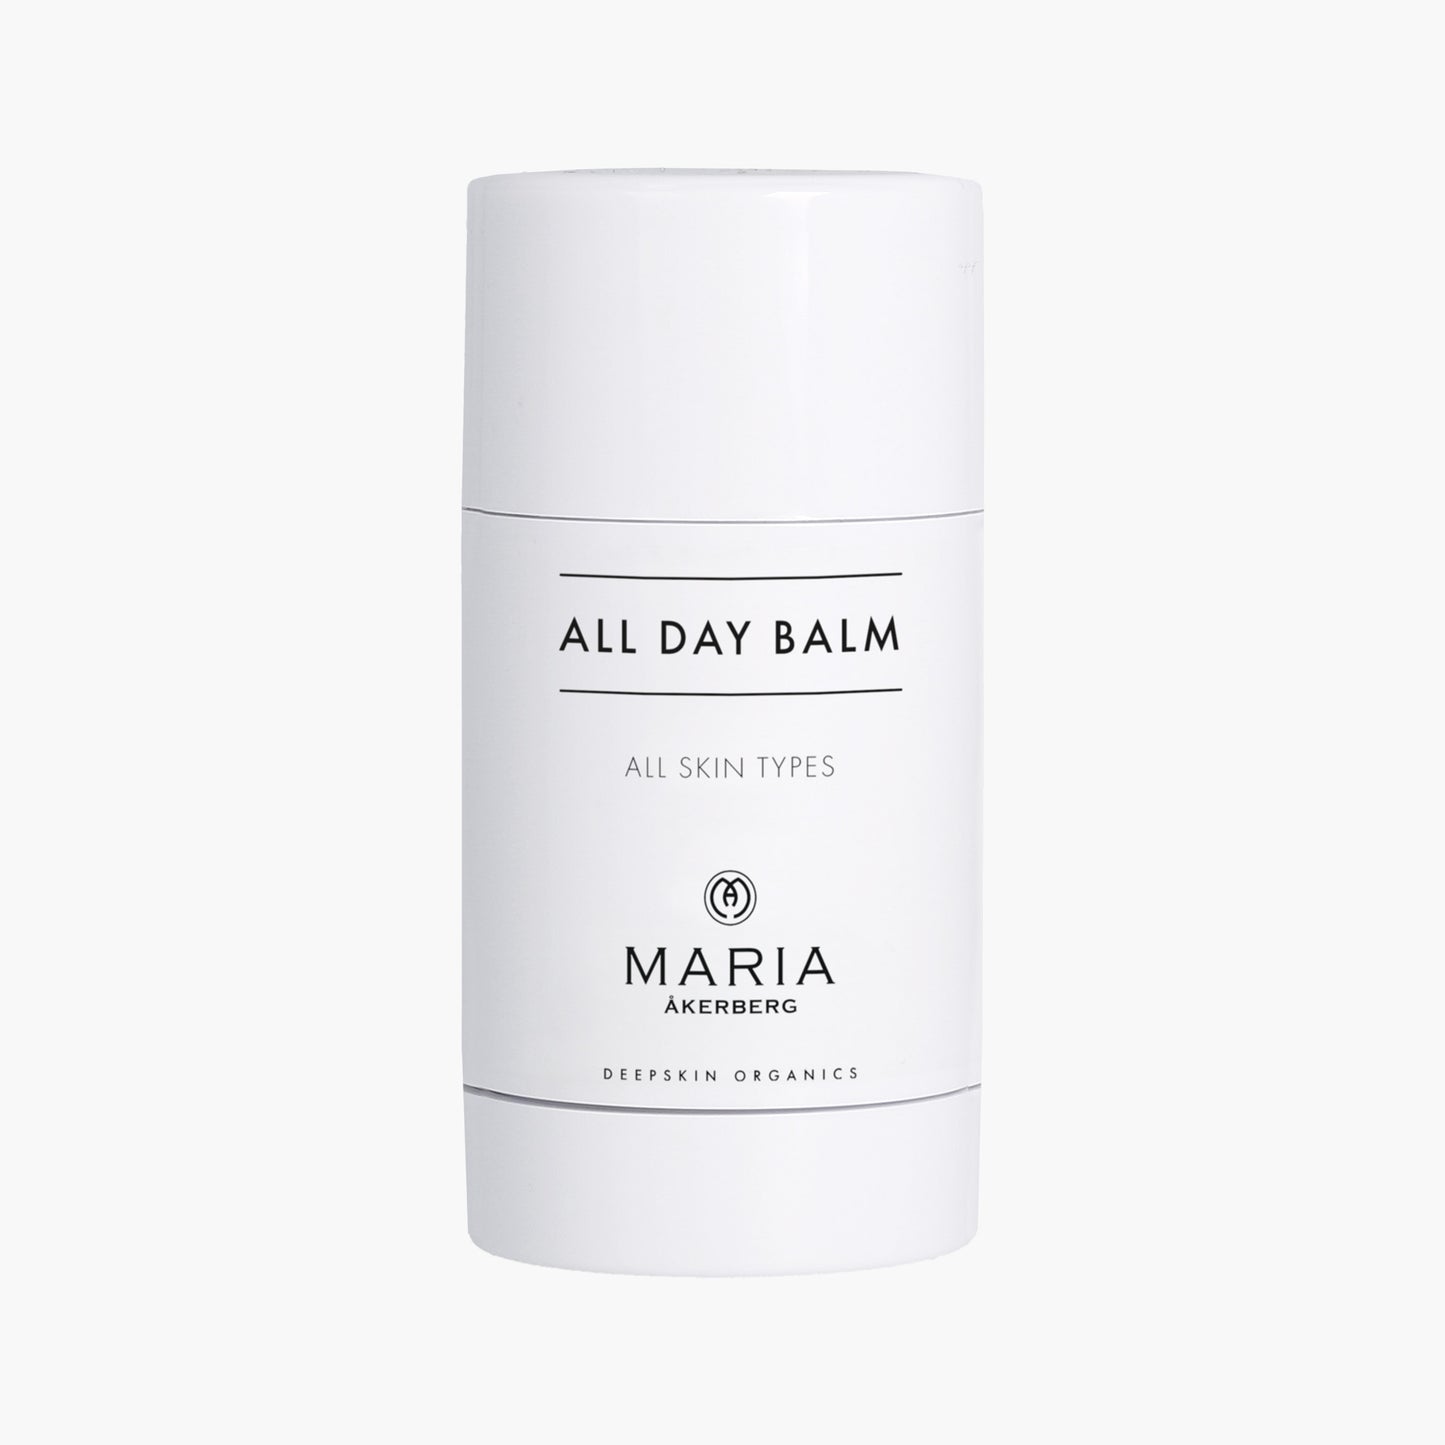 All Day Balm